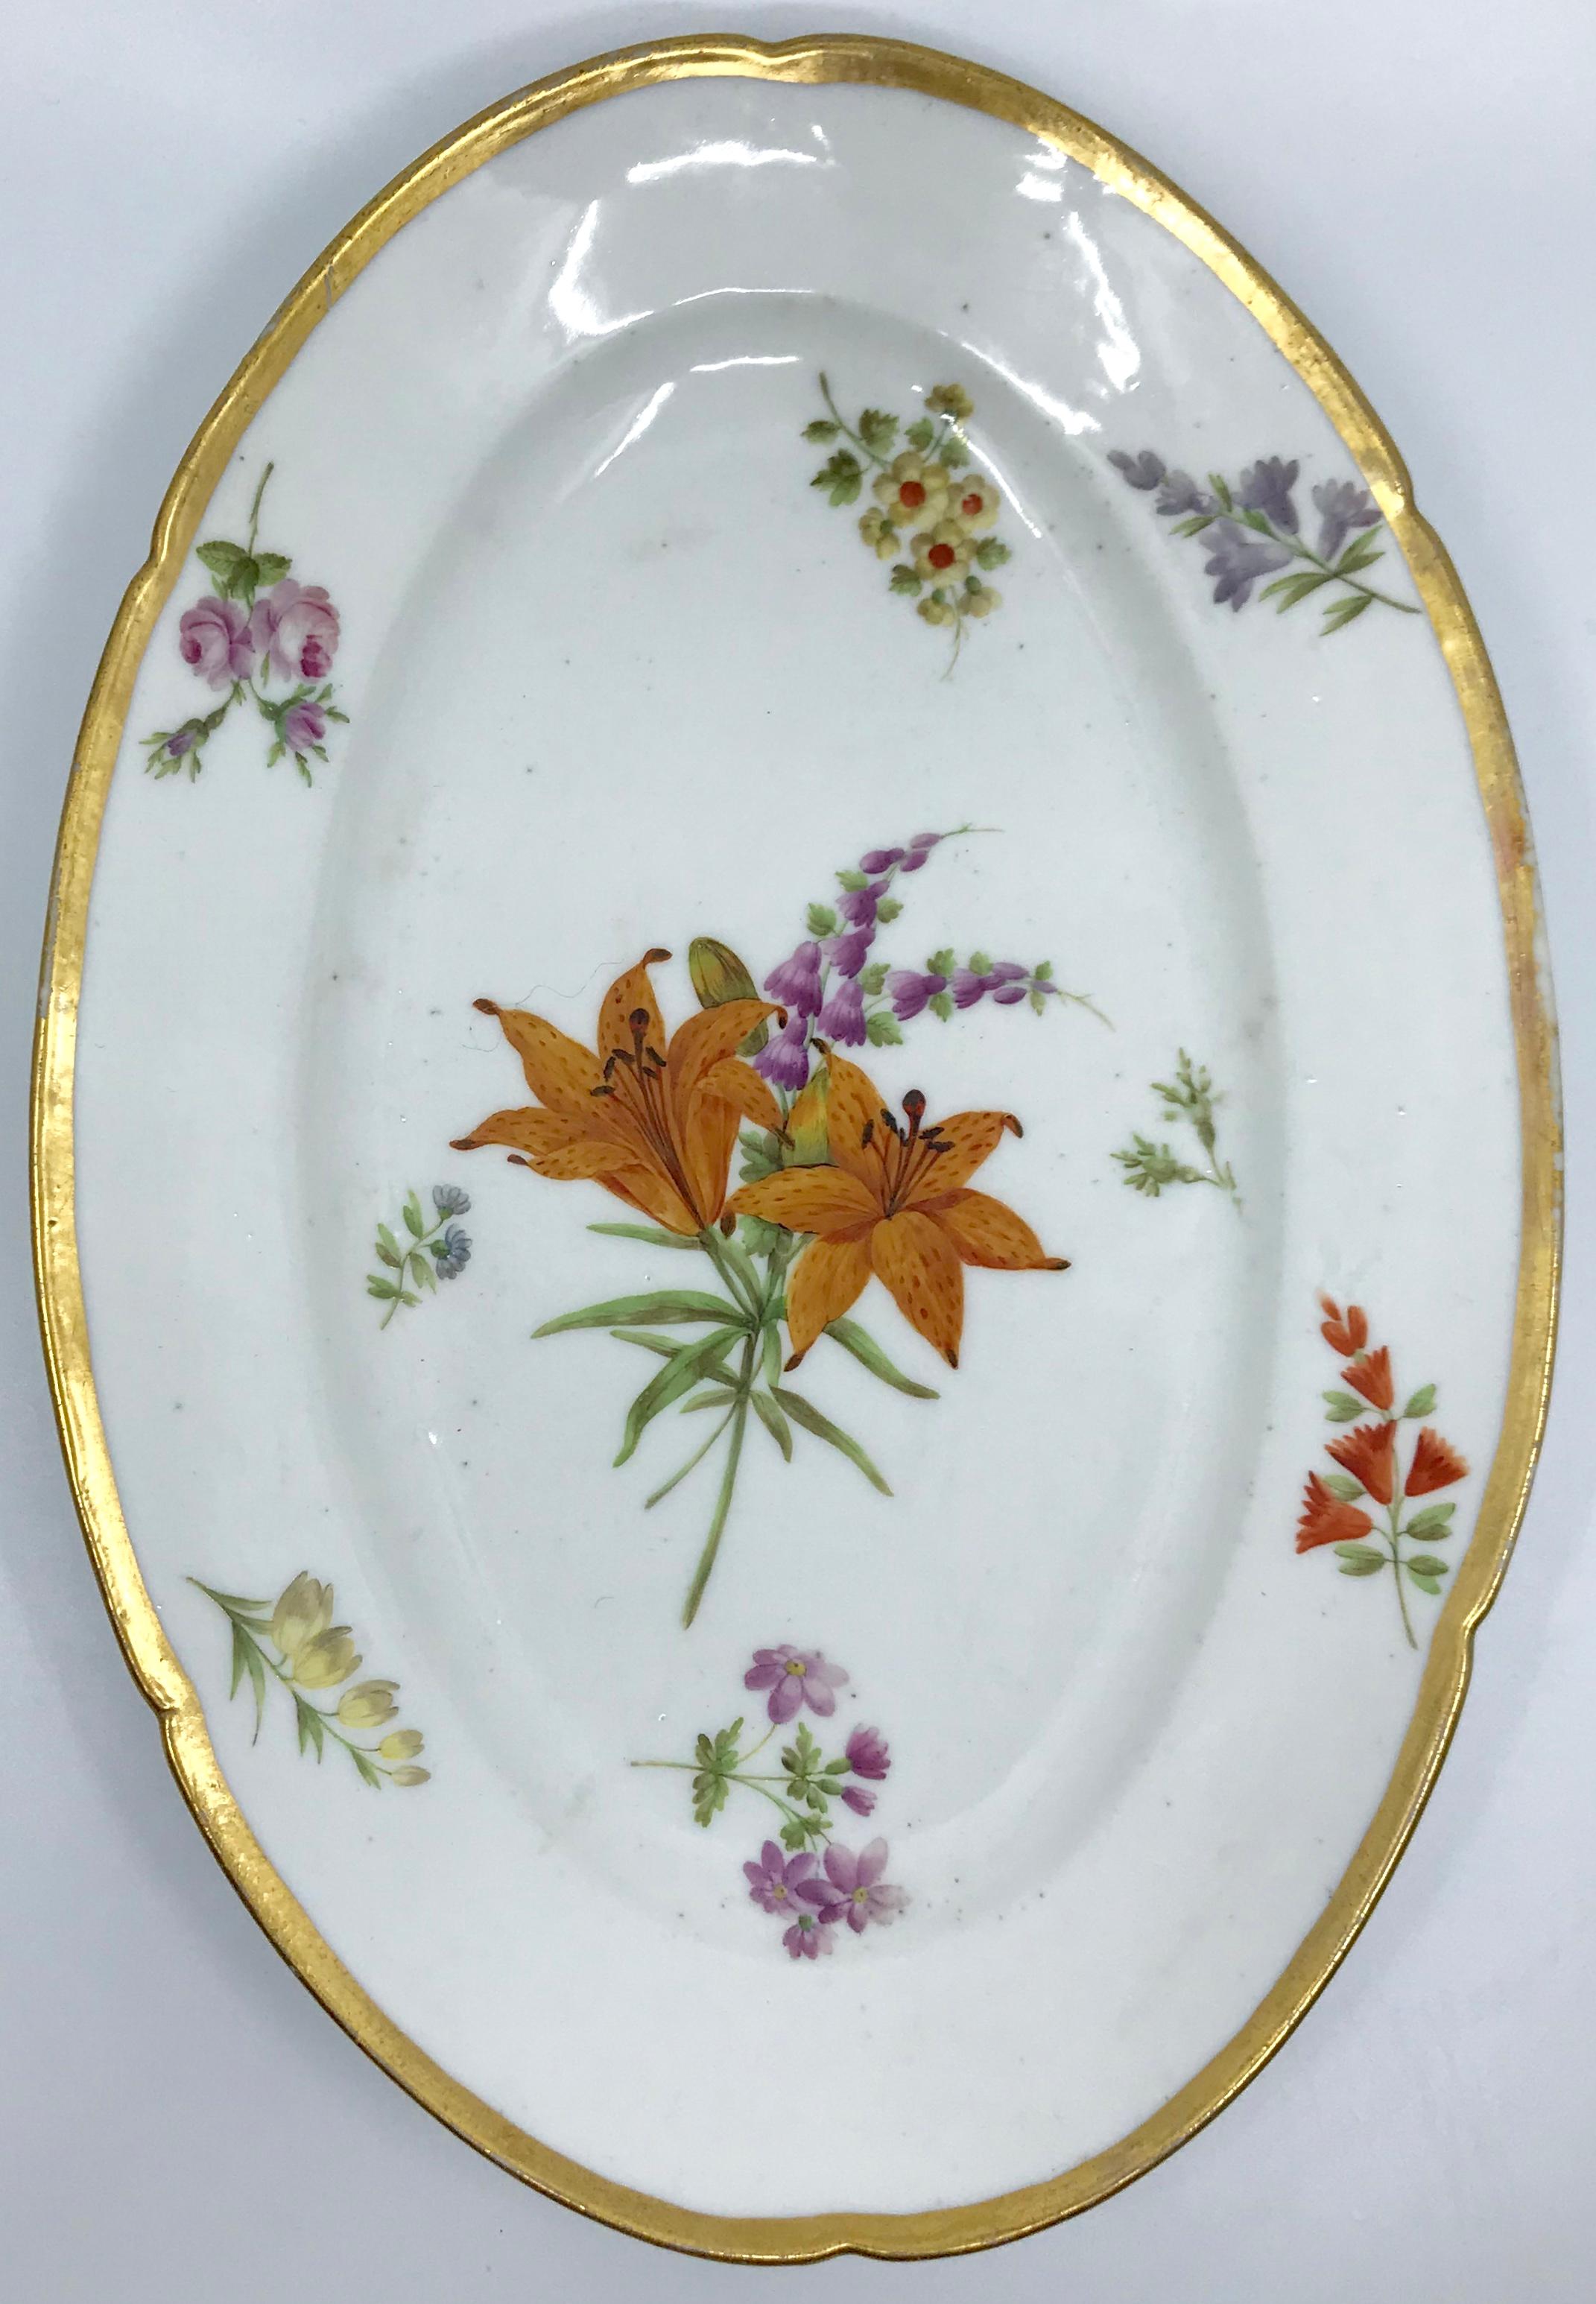 Pair of old Paris gilt porcelain floral platters pair lozenge shaped gilt rimmed serving platters with lobed gilt banding of different flower sprigs centering central lozenge with lilies and old roses in beautiful condition with minor wear to some